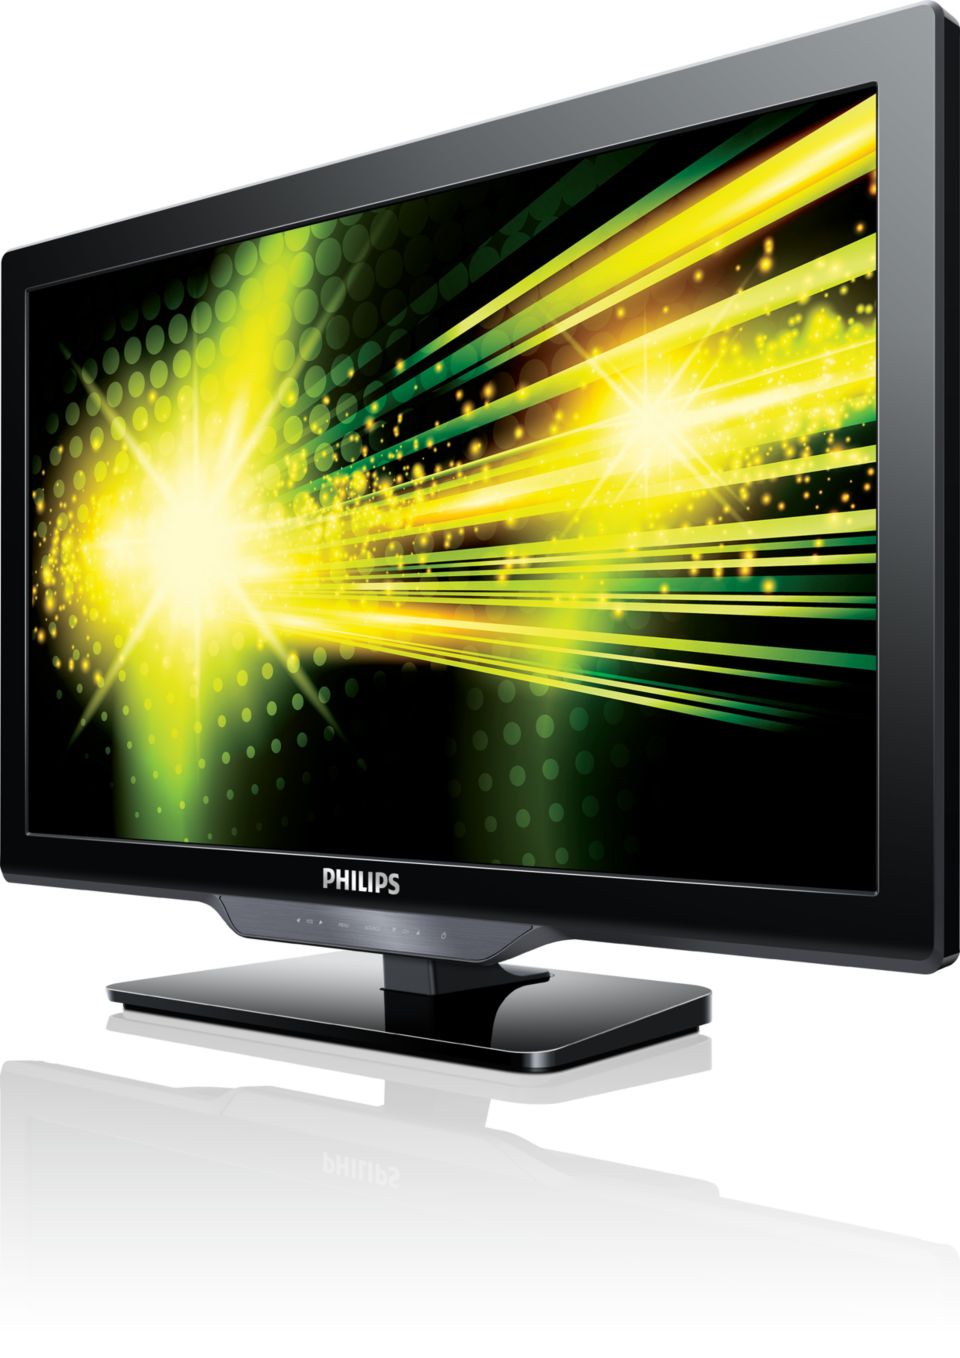 Philips 22 Philips 22pfl4507 LED TV Monitor with HDMI connector